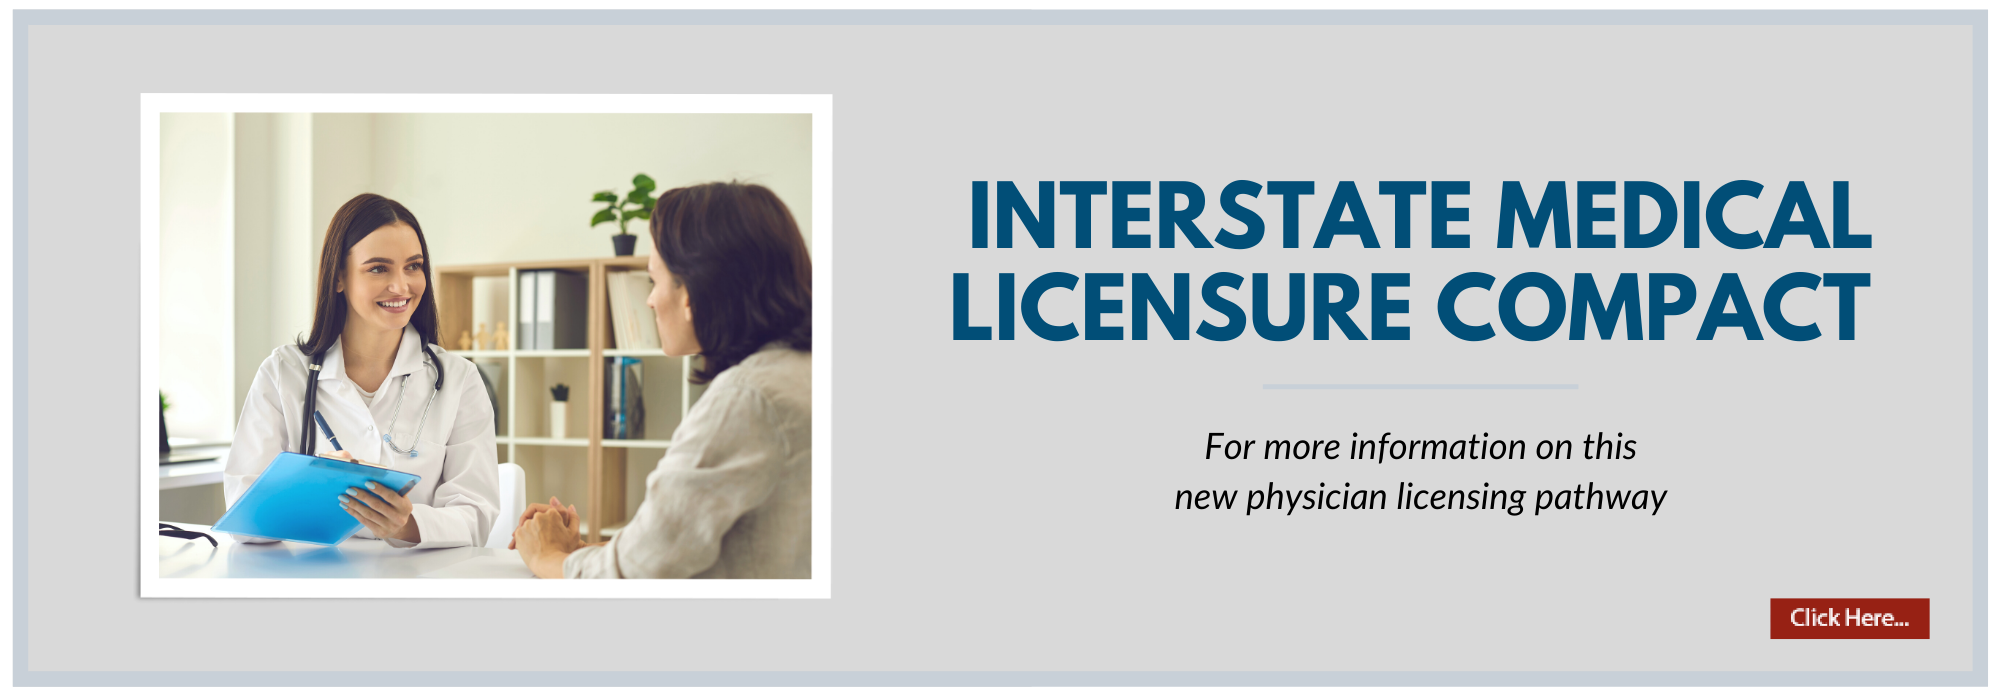 Rotator banner for Interstate Medical Licensure Compact (IMLC)